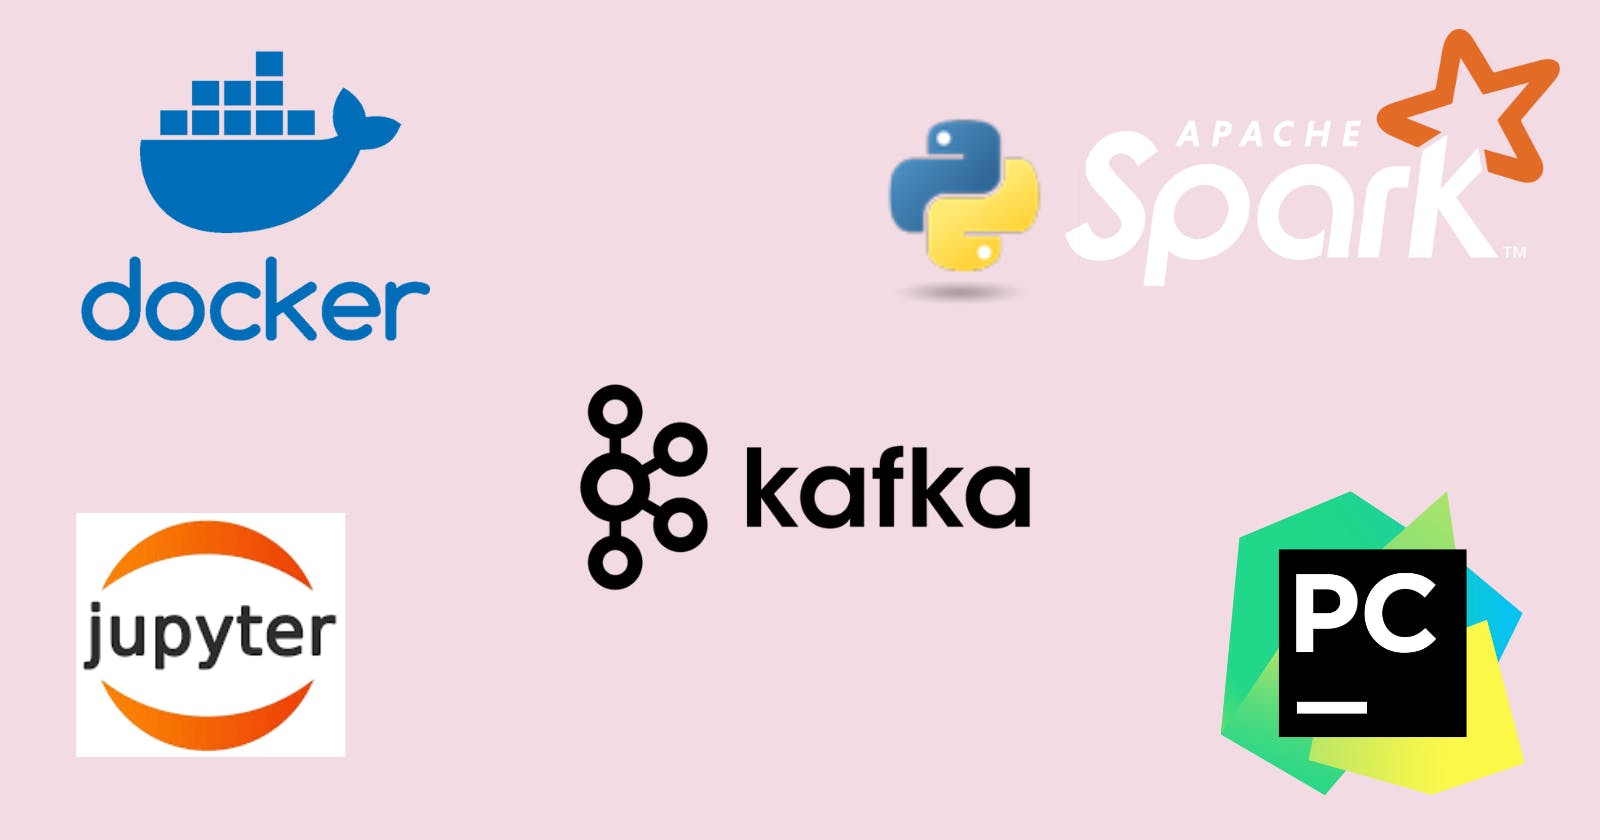 Building a Local Development Environment with PySpark, Jupyter, Kafka, Docker and PyCharm